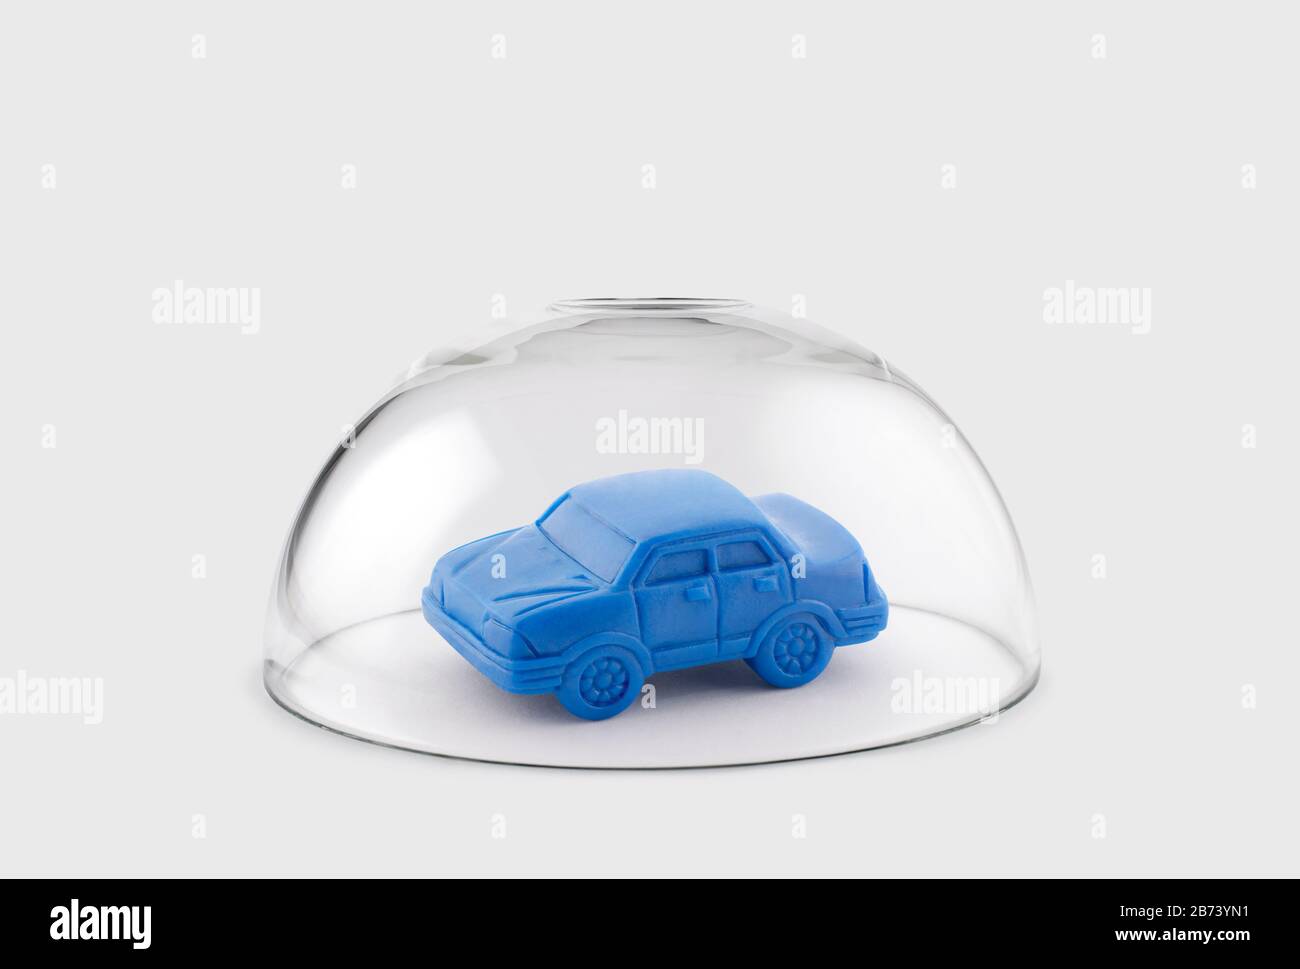 Blue toy car protected under a glass dome Stock Photo